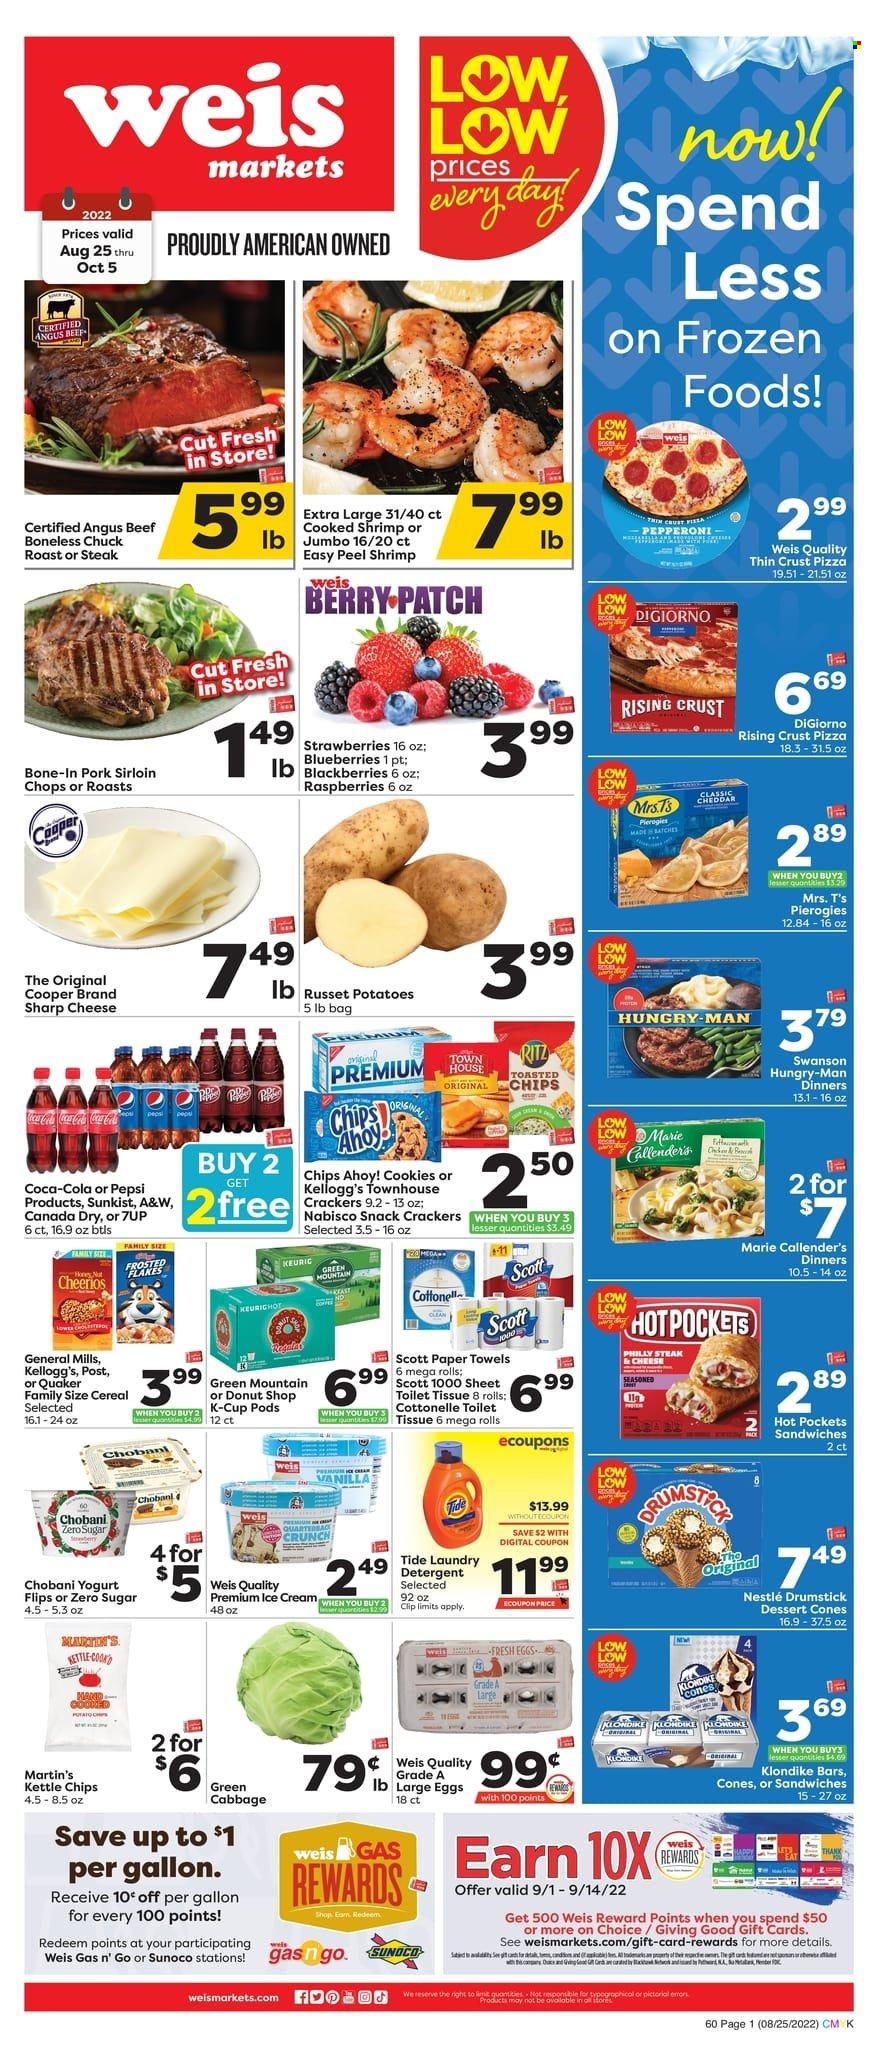 thumbnail - Weis Flyer - 08/25/2022 - 10/05/2022 - Sales products - cabbage, russet potatoes, potatoes, blackberries, blueberries, beef meat, steak, chuck roast, pork loin, shrimps, hot pocket, pizza, sandwich, Quaker, Marie Callender's, pepperoni, yoghurt, Chobani, large eggs, ice cream, cookies, Nestlé, snack, crackers, Kellogg's, Chips Ahoy!, RITZ, cereals, Cheerios, Canada Dry, Coca-Cola, Pepsi, 7UP, A&W, coffee capsules, K-Cups, Green Mountain, Cottonelle, Scott, toilet paper, kitchen towels, paper towels, detergent, Tide, laundry detergent, Sharp. Page 1.